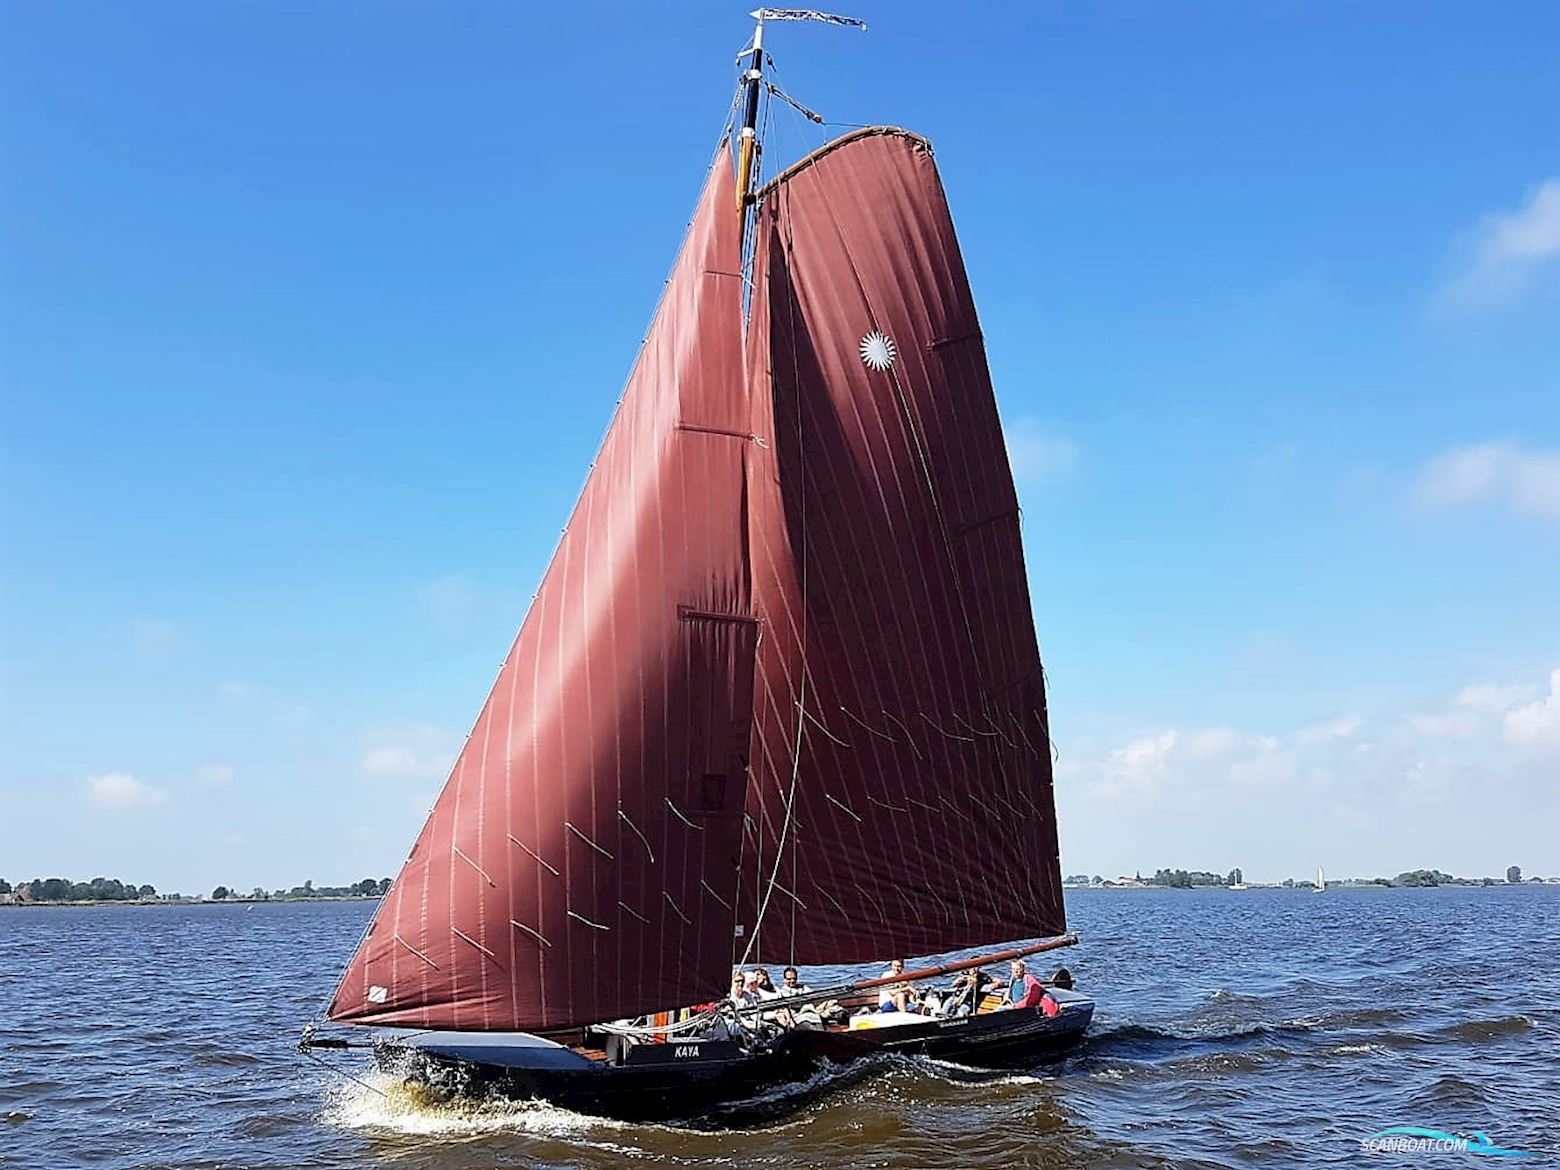 Friese Zeilpraam 12.00 Sailing boat 1900, with Yanmar engine, The Netherlands